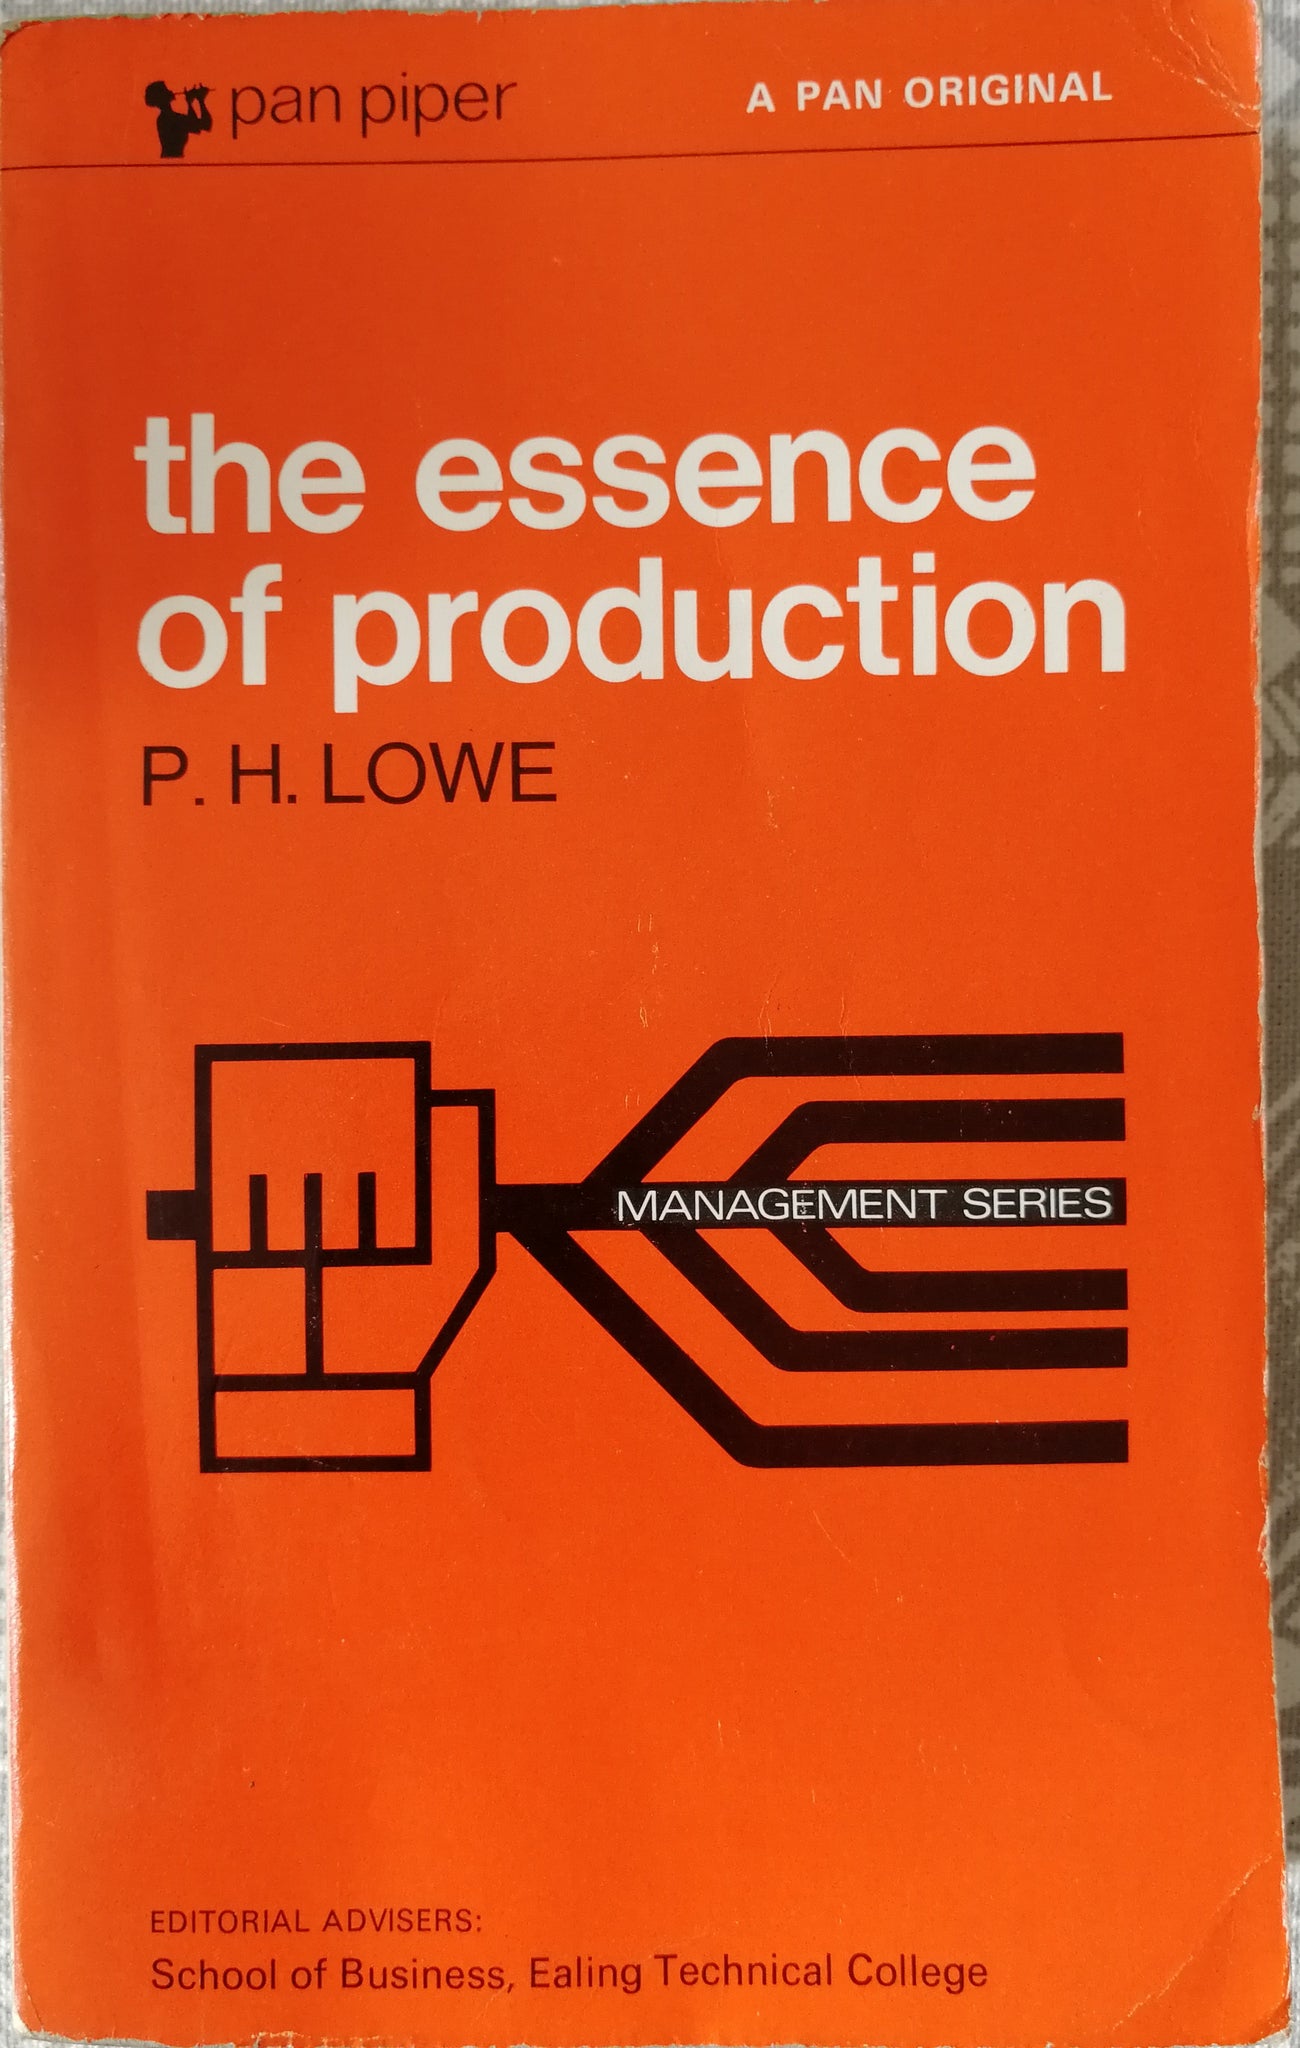 The Essence of Production by P.H. Lowe